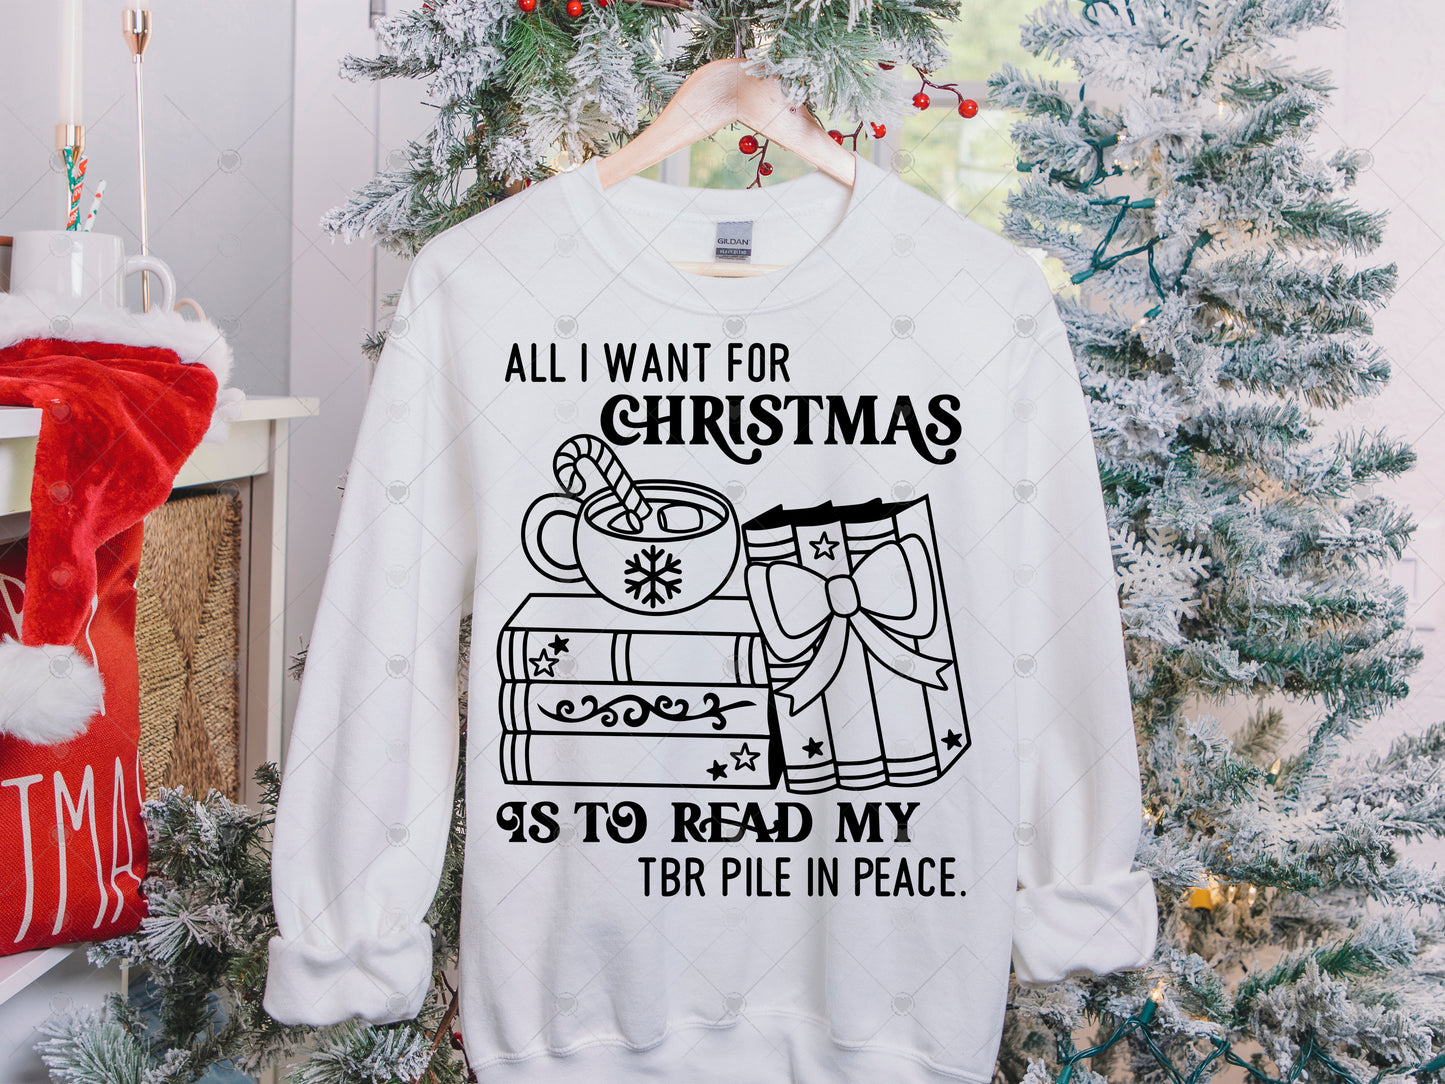 All I Want For Christmas is to Read my TBR Pile in Peace Design